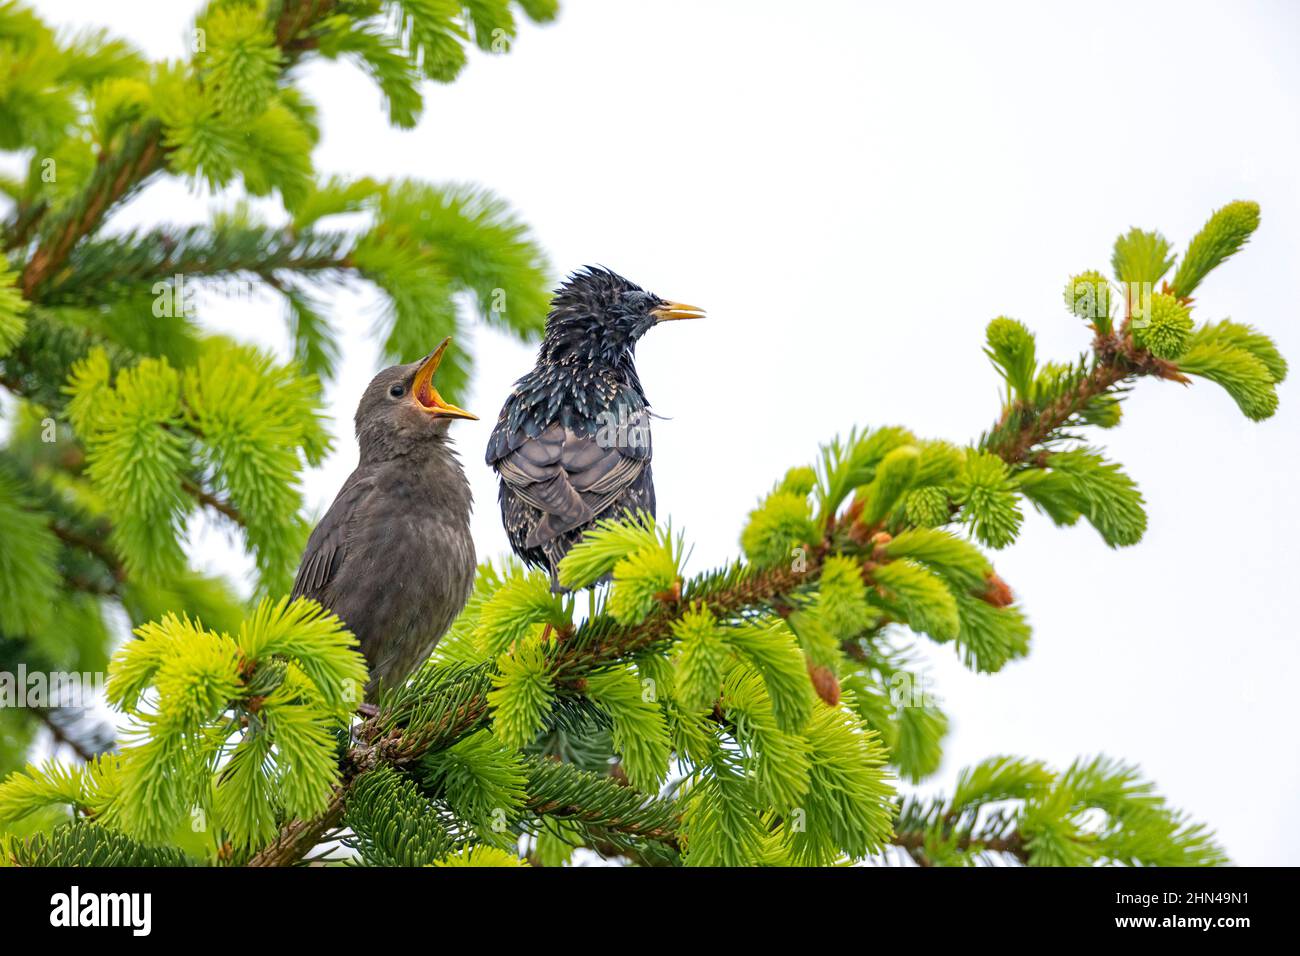 European Starling (Sturnus vulgaris). Although the young starling has just been fed by the parent bird, it is loudly begged. The parent look up disheveled, because the time of raising the young is very exhausting after all. Germany Stock Photo